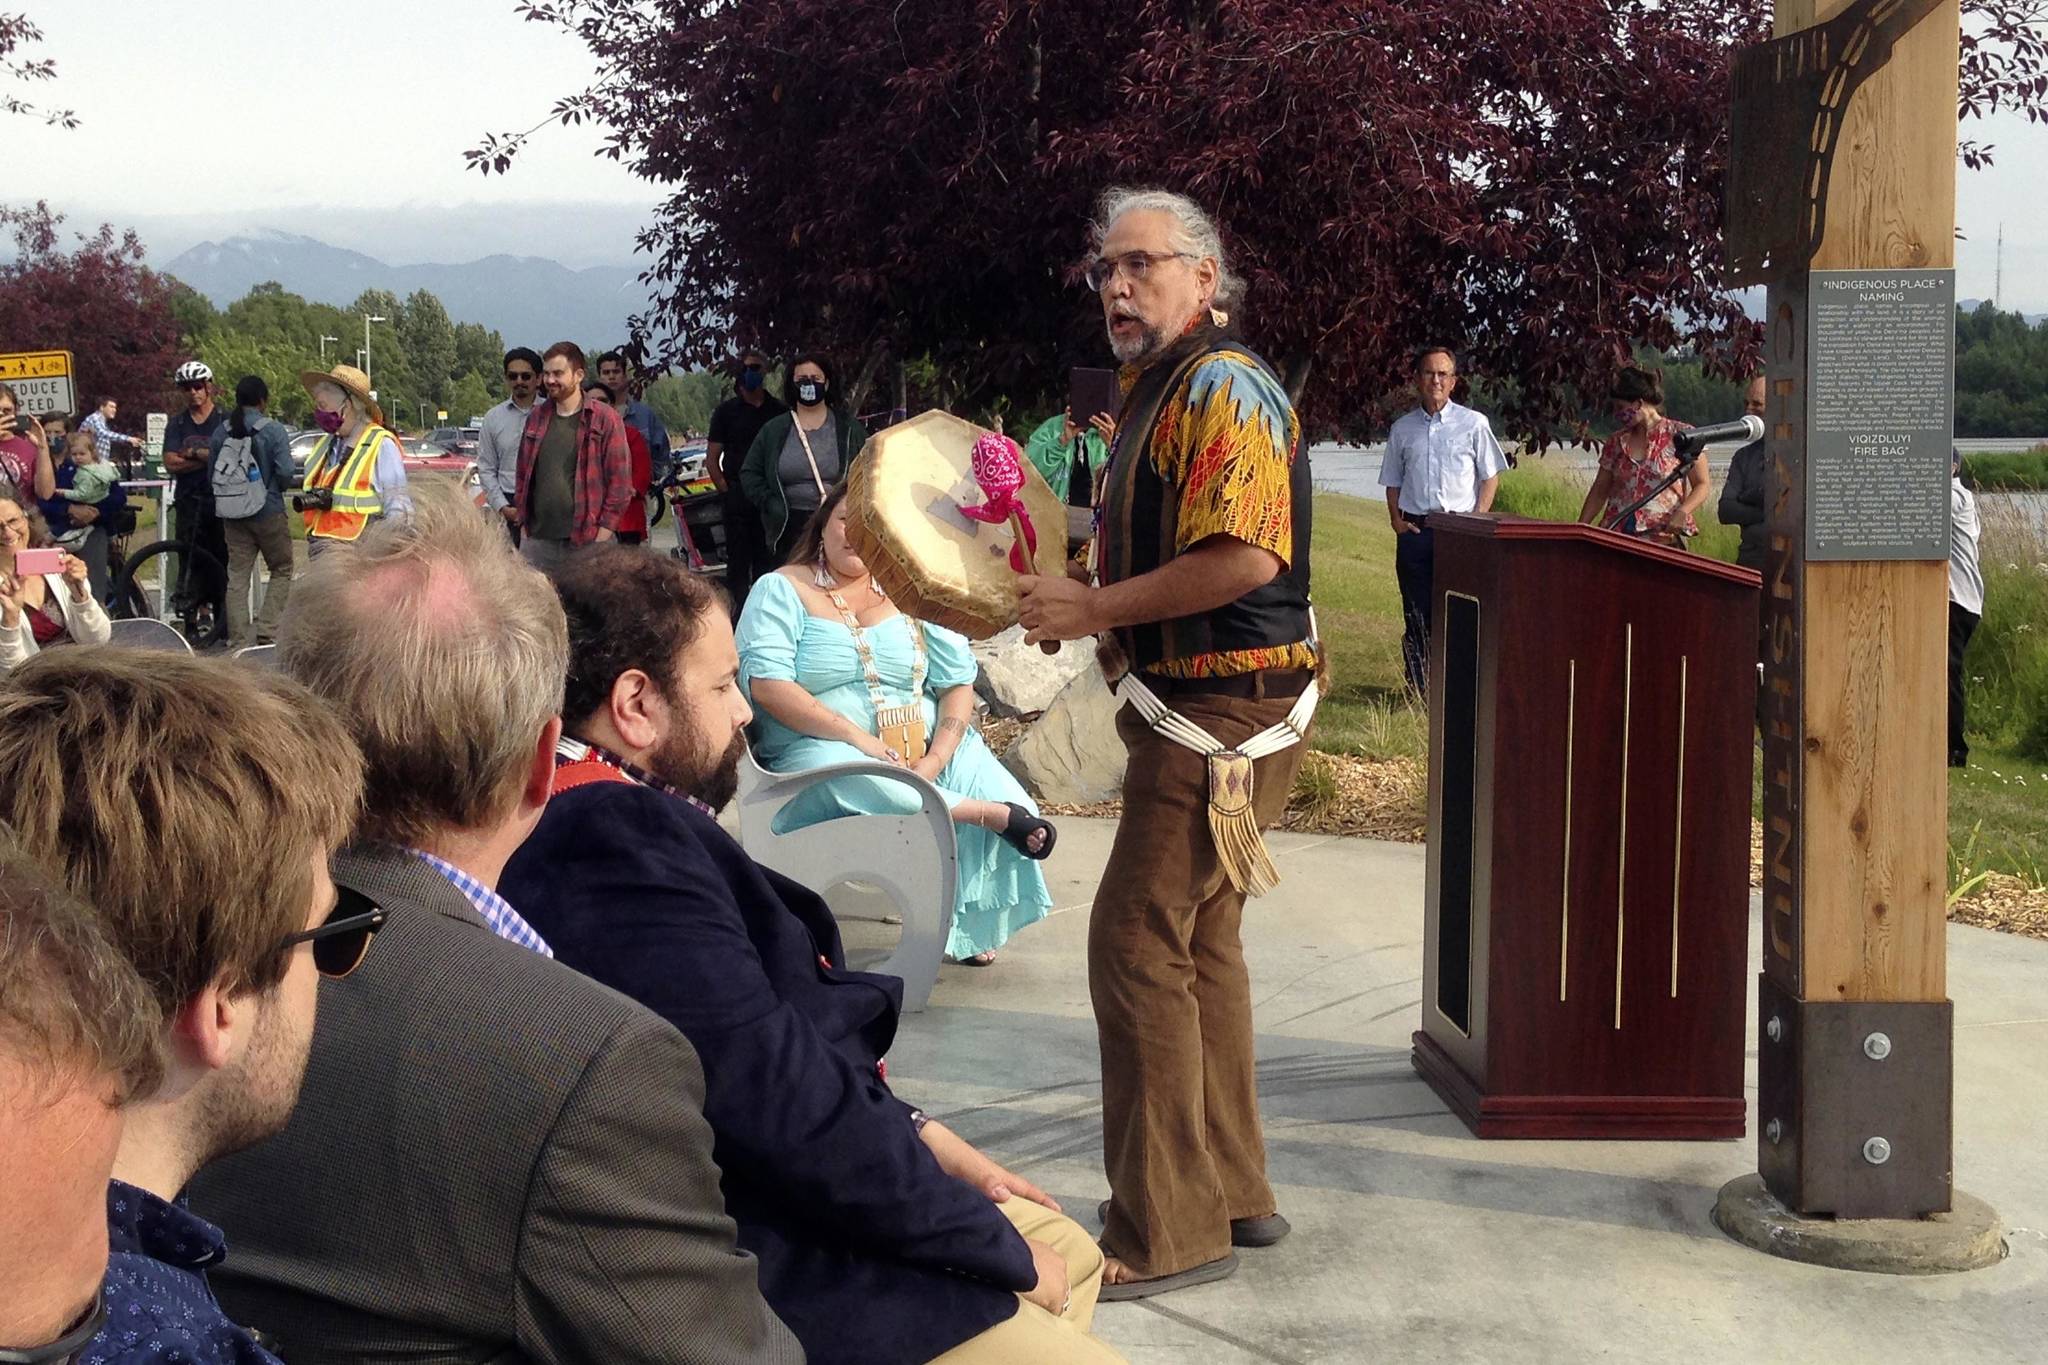 Joaqlin Estus / Indian Country Today
Athabascan singer and storyteller George Holly performs at the unveiling of a place-name marker at Chanshtnu, or “grassy creek,” the Dena’ina Athabascan name for Westchester Lagoon, on Aug. 3 in Anchorage.